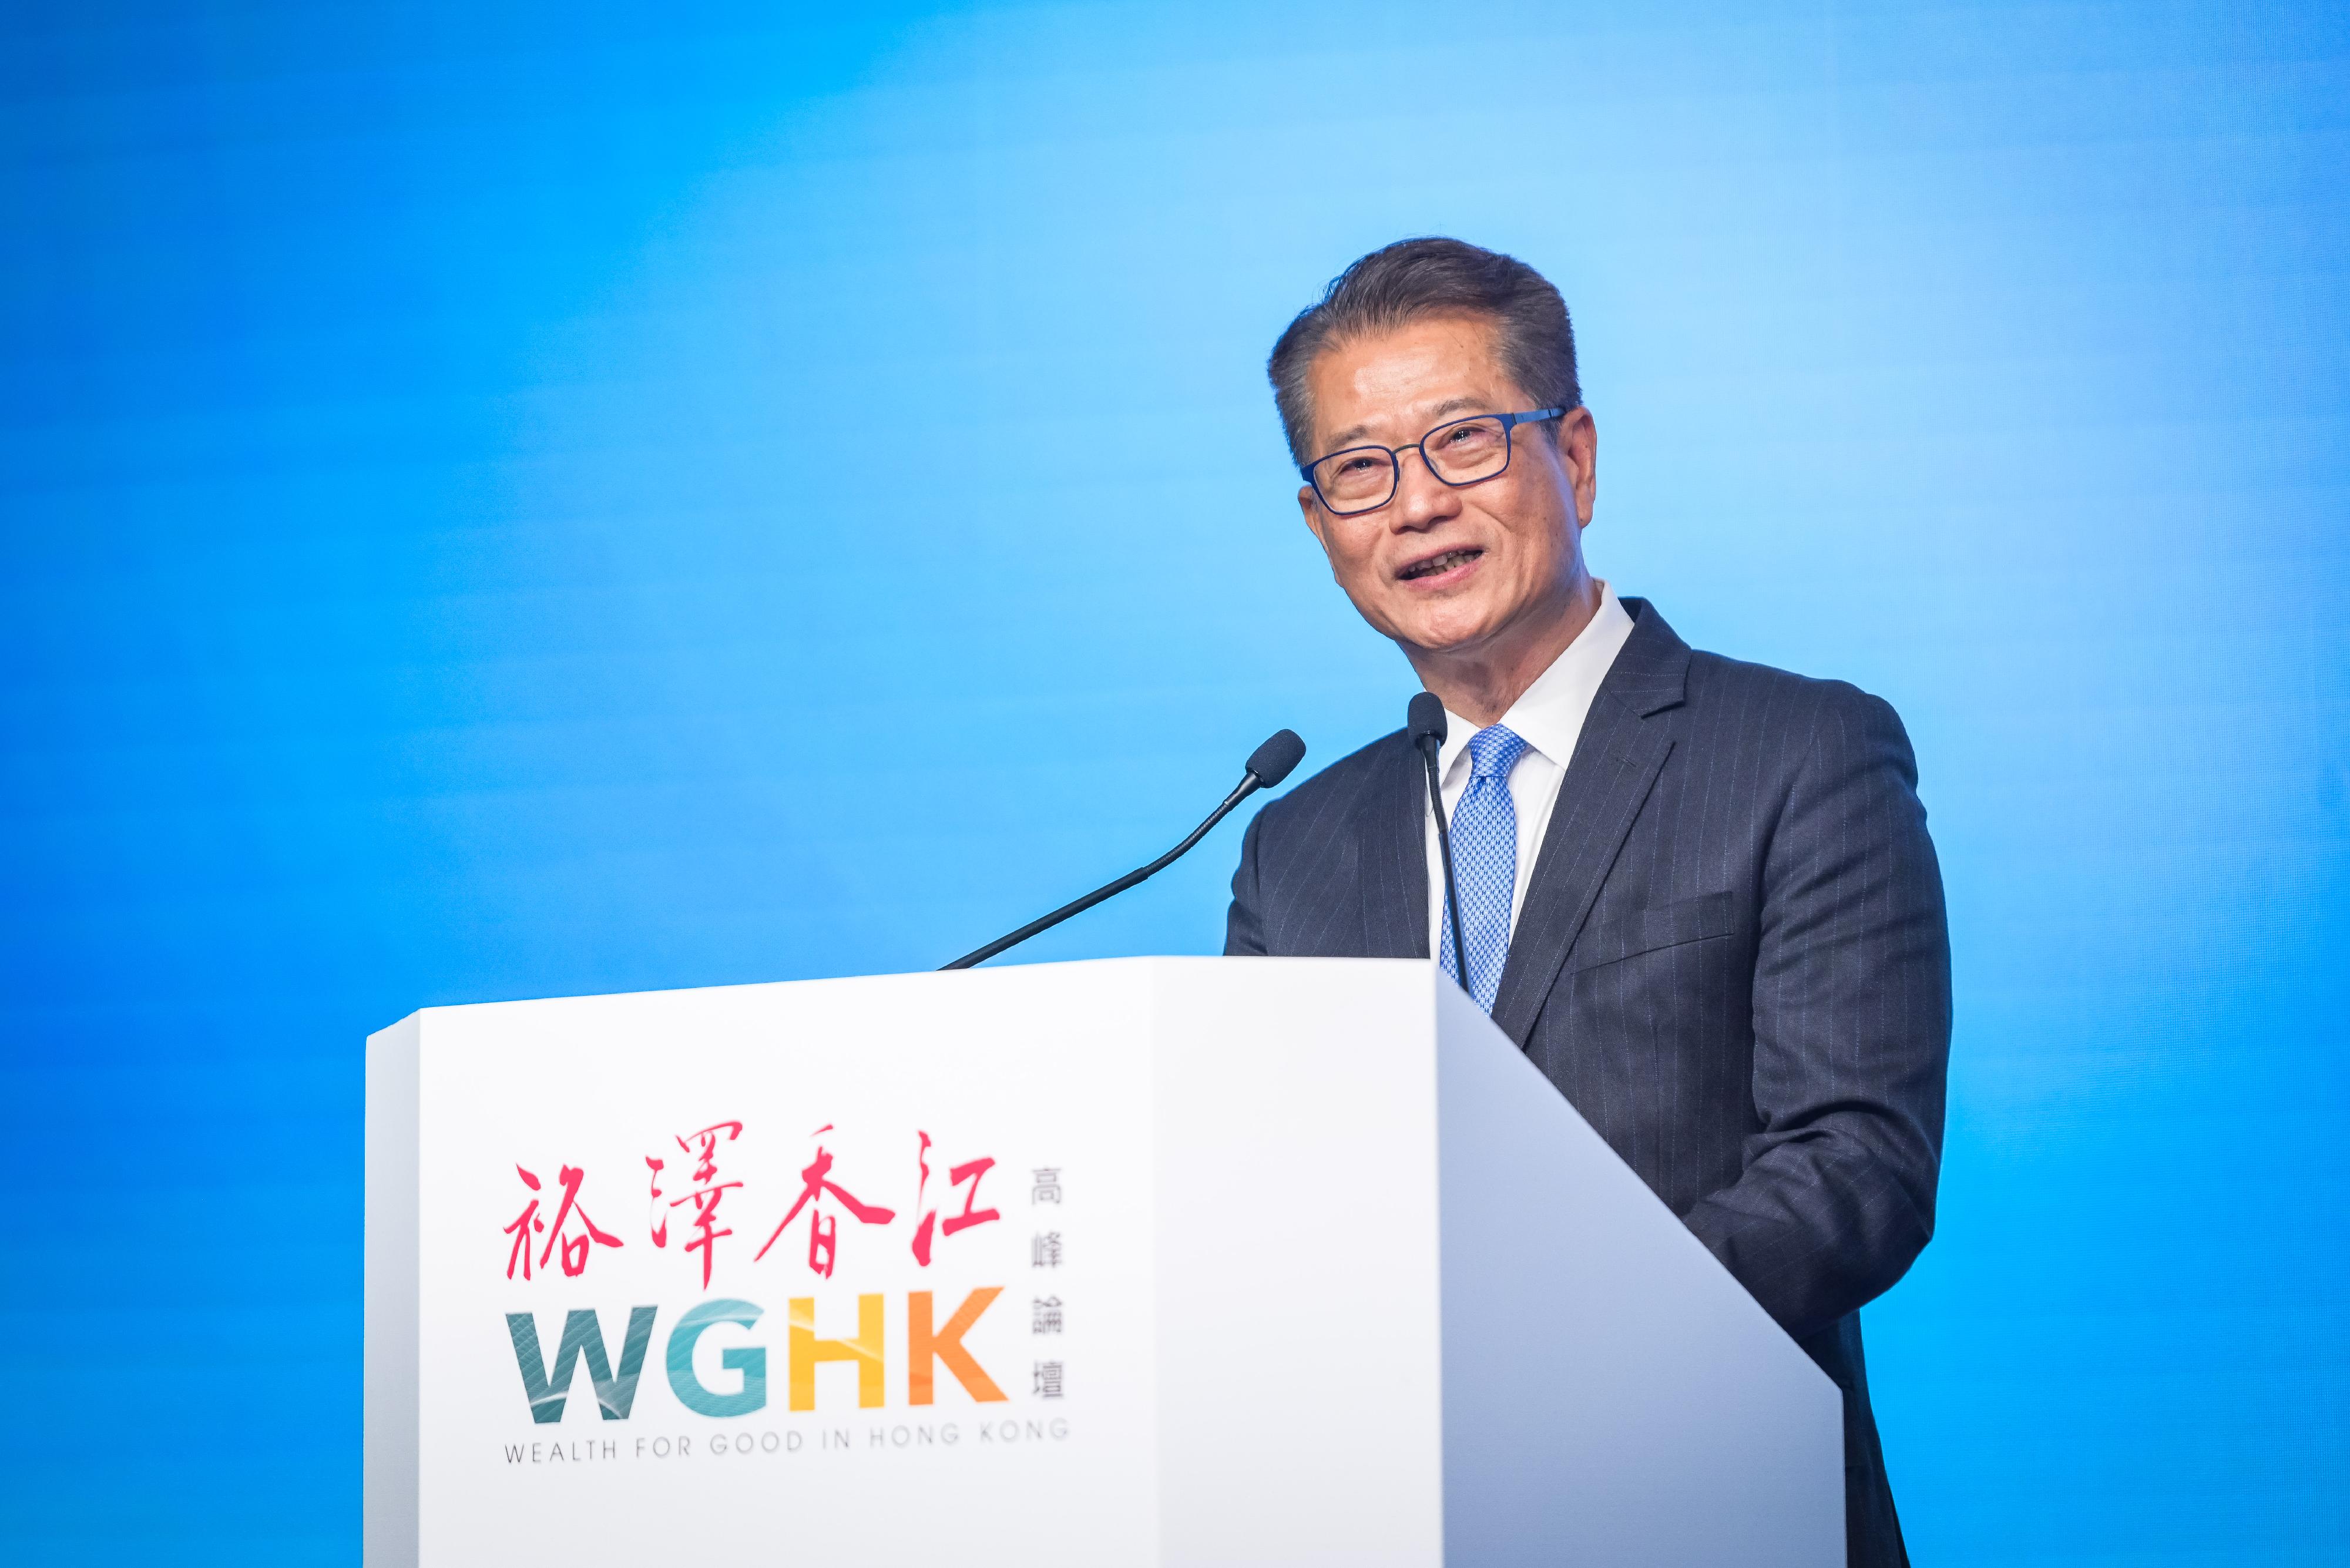 The Financial Secretary, Mr Paul Chan, speaks at the Wealth for Good in Hong Kong Summit Gala Dinner today (March 27).